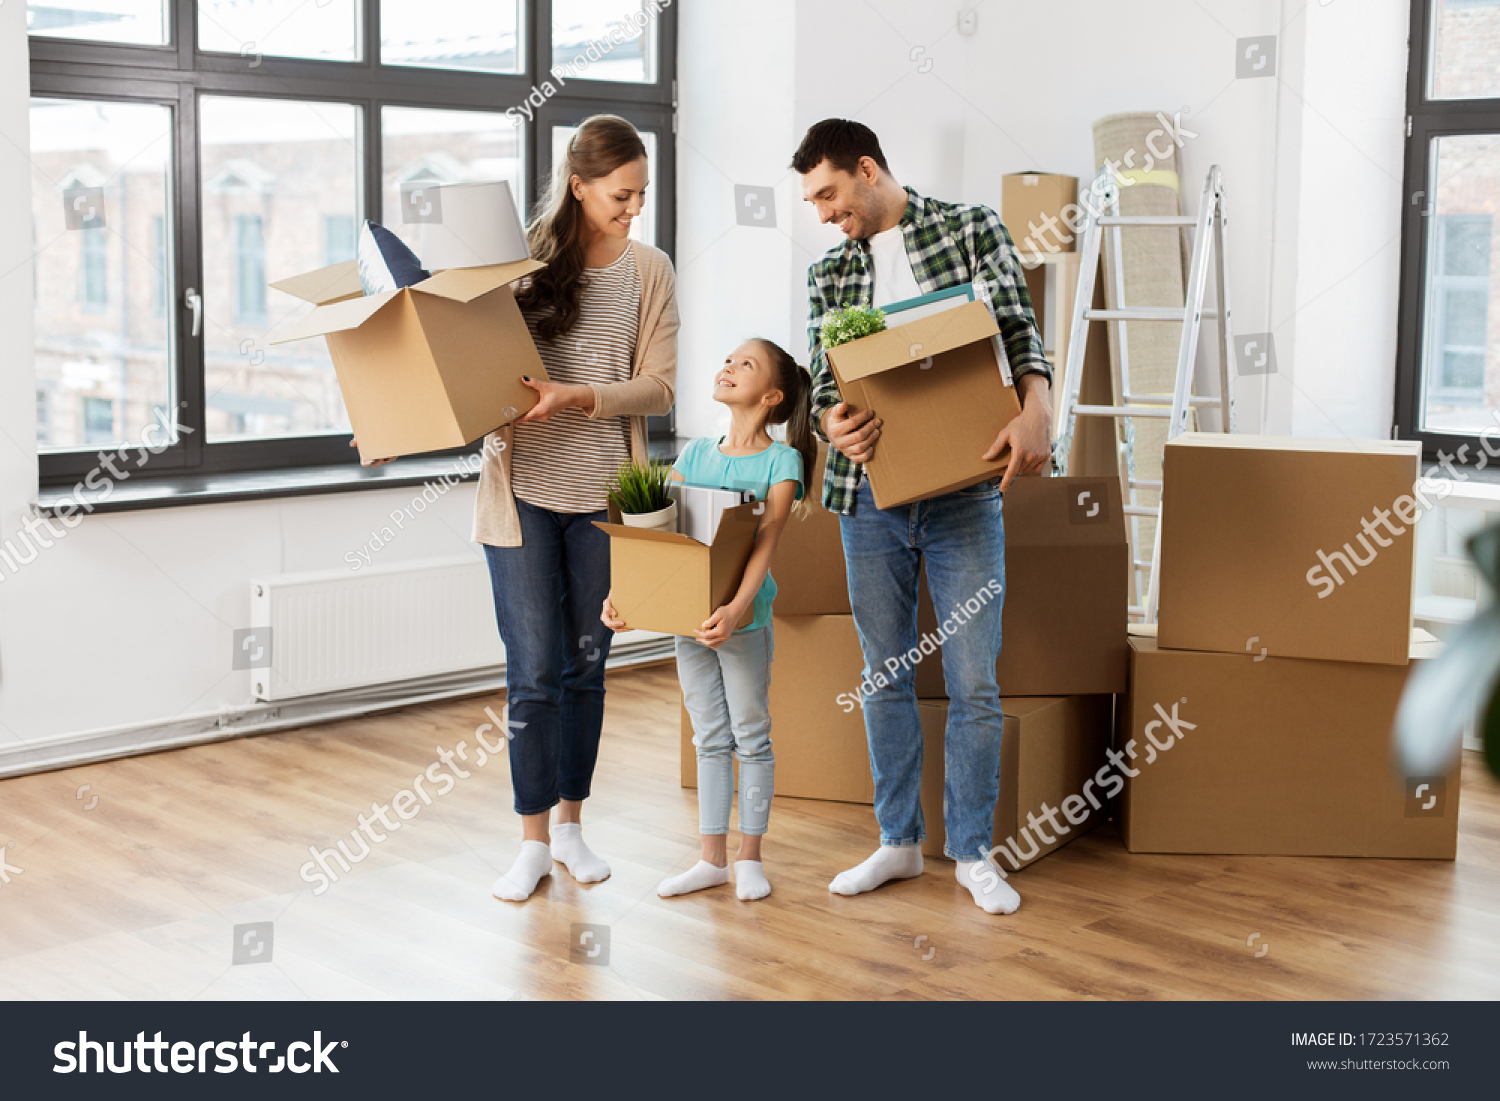 mortgage, family and real estate concept - happy mother, father and little daughter with stuff in boxes moving to new home #1723571362